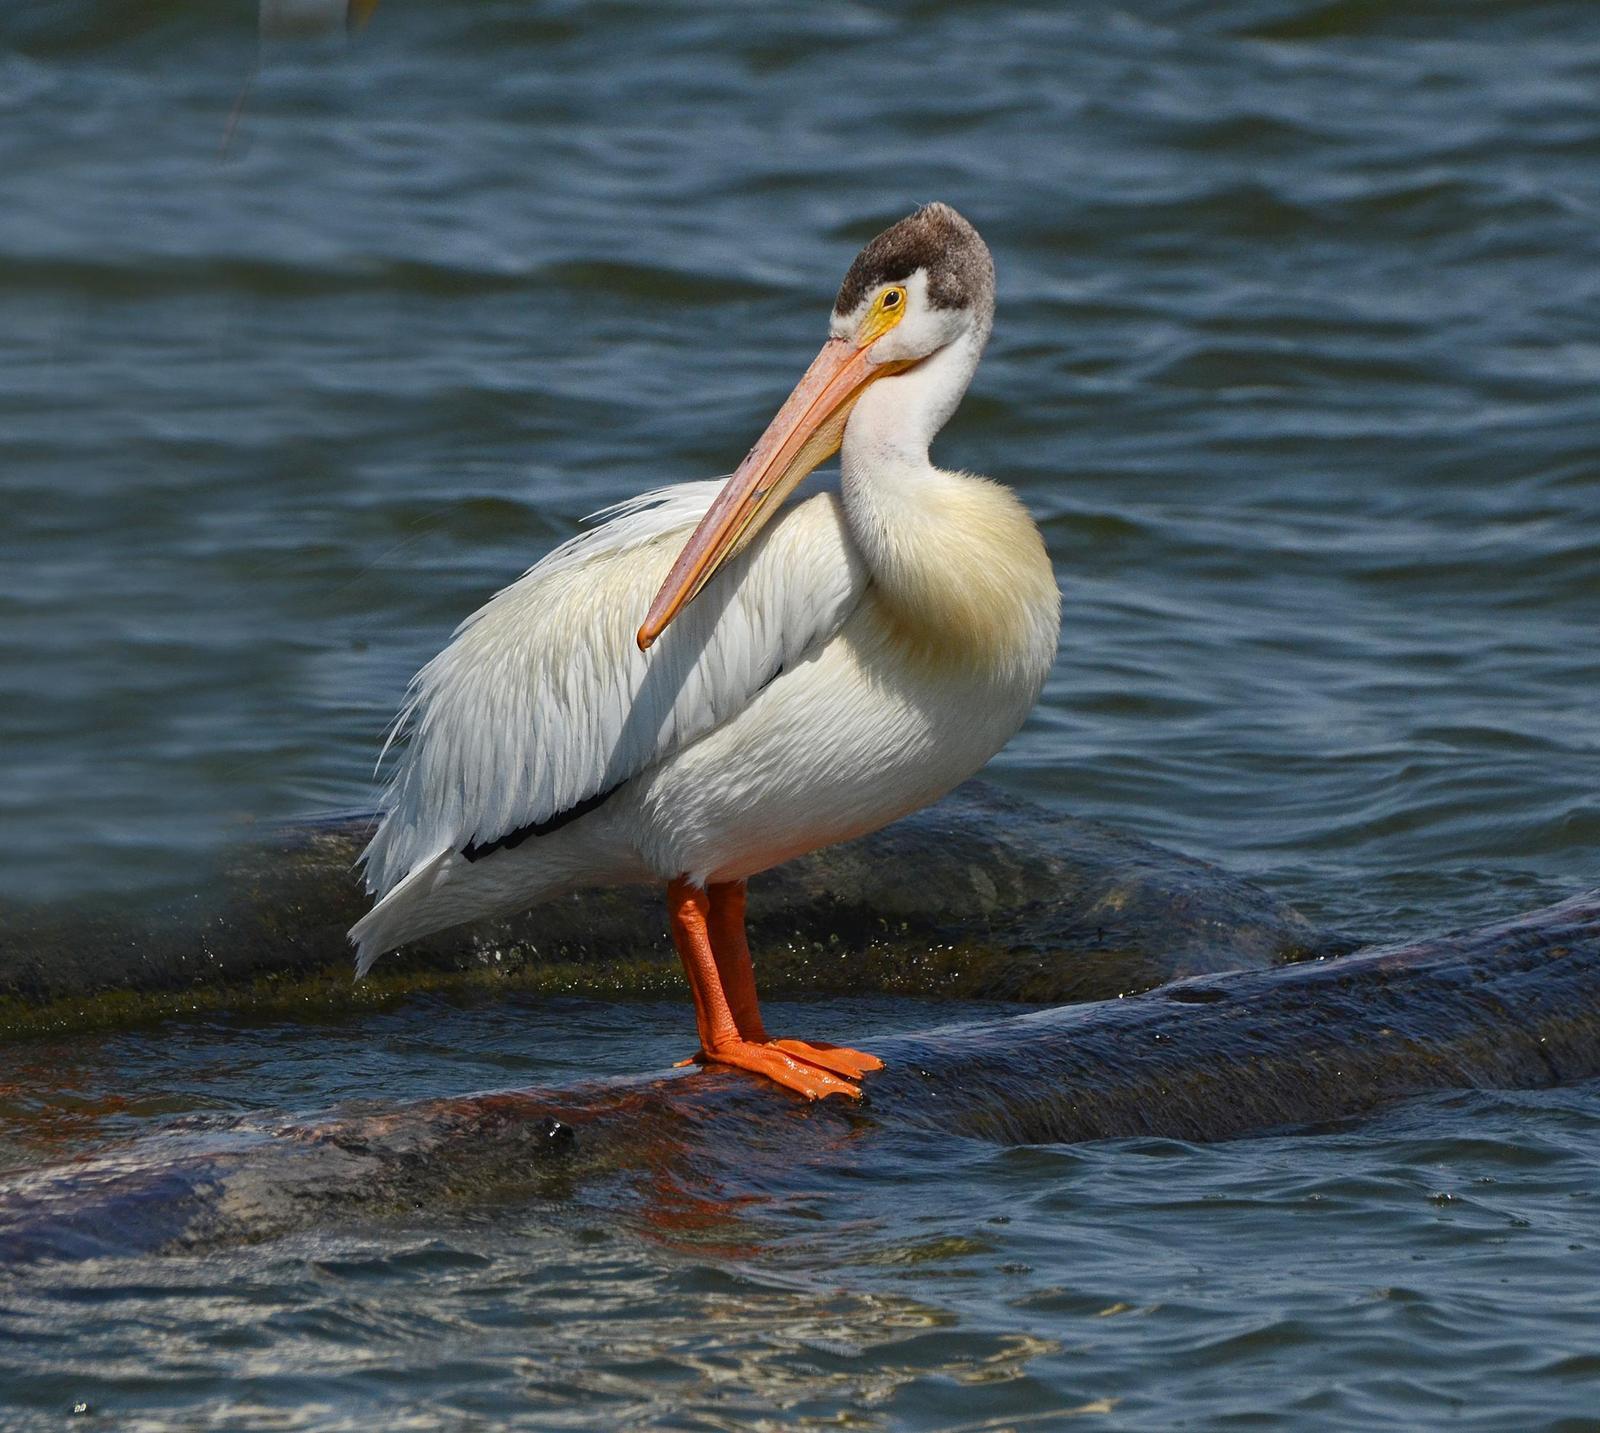 American White Pelican Photo by Steven Mlodinow